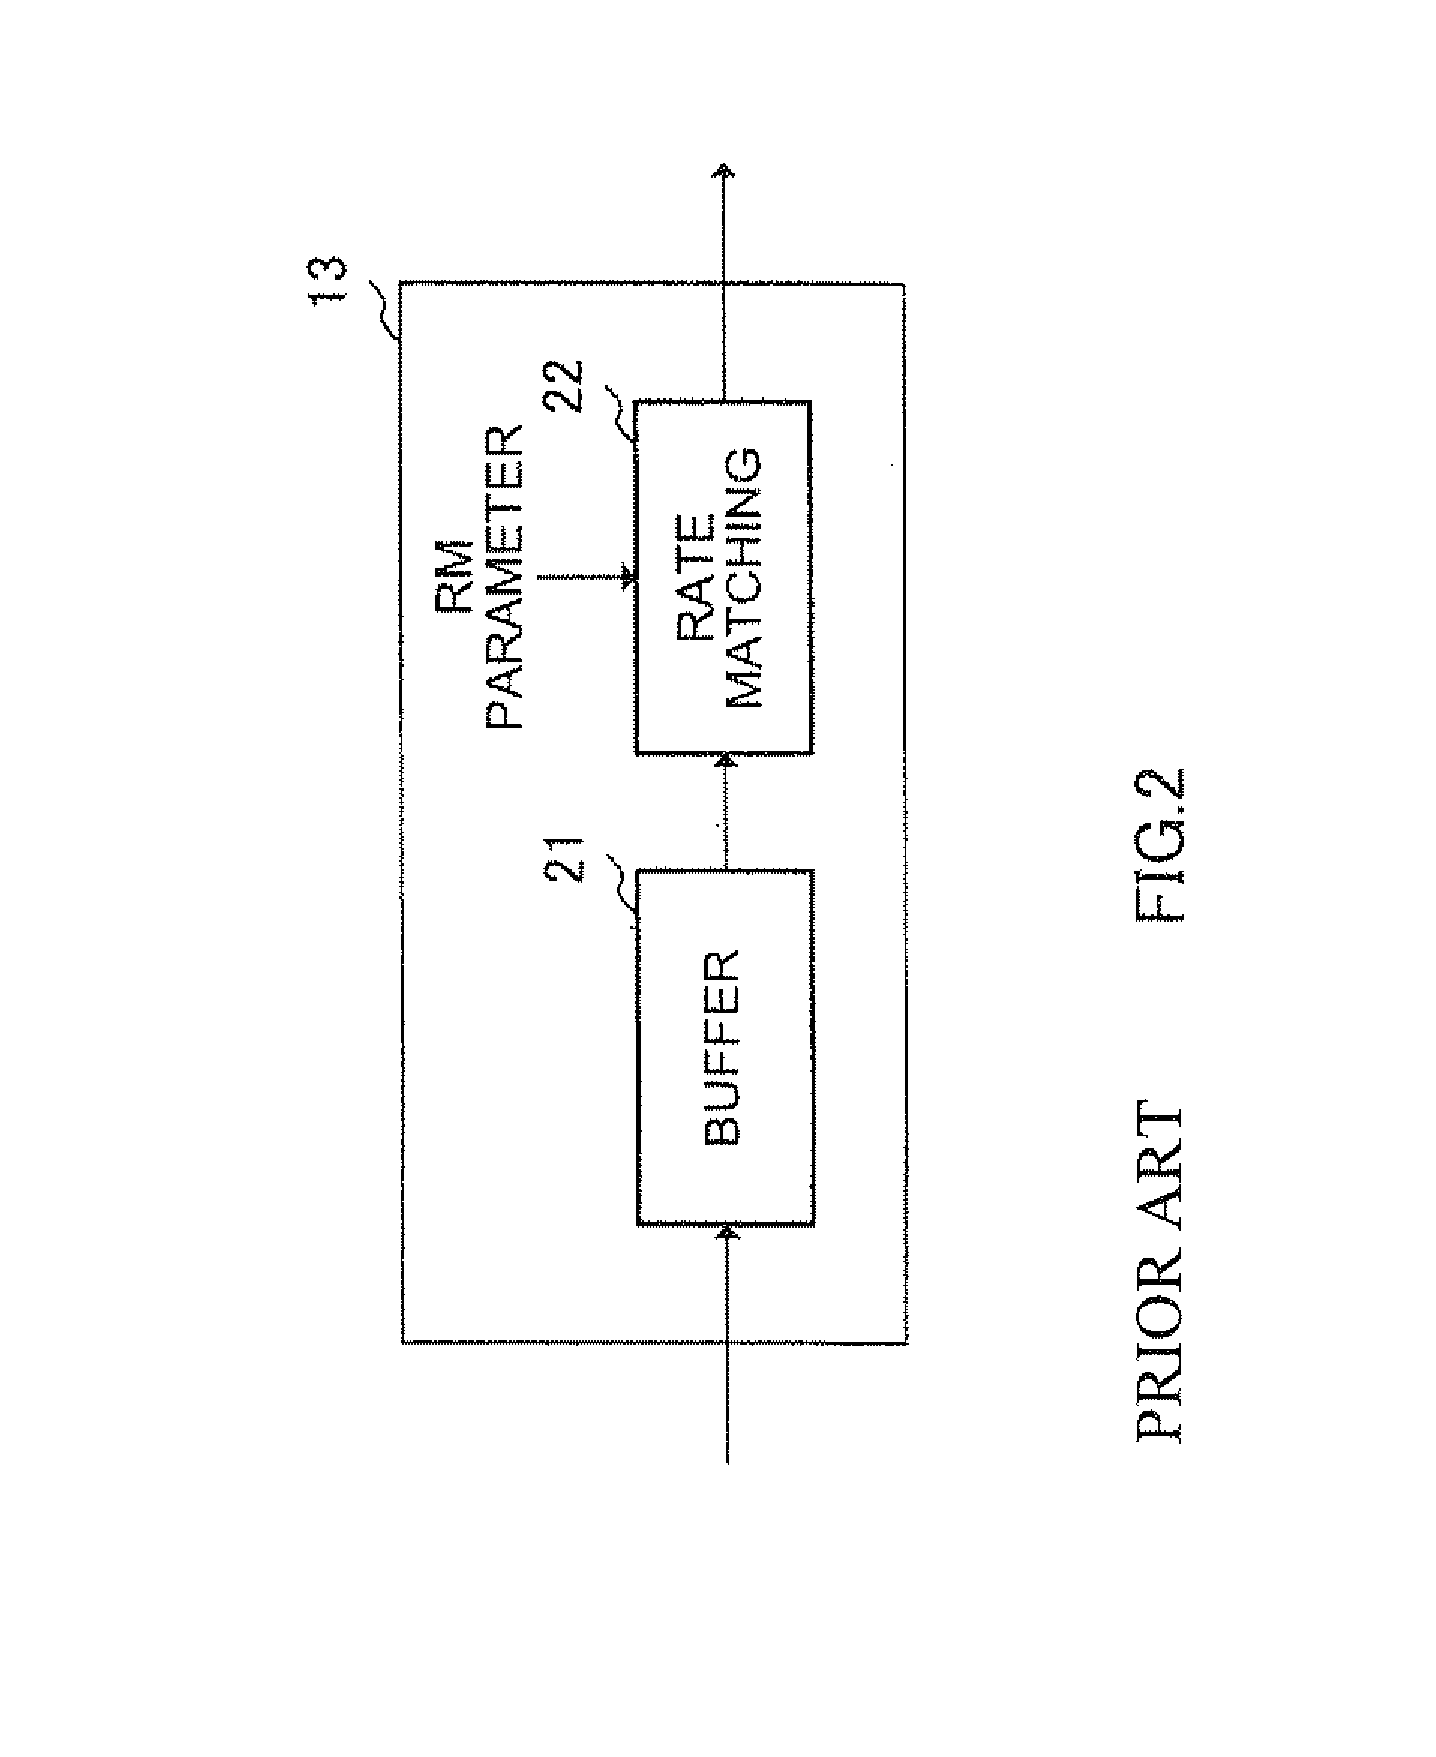 Base station using a multicarrier communication band divided into a plurality of blocks